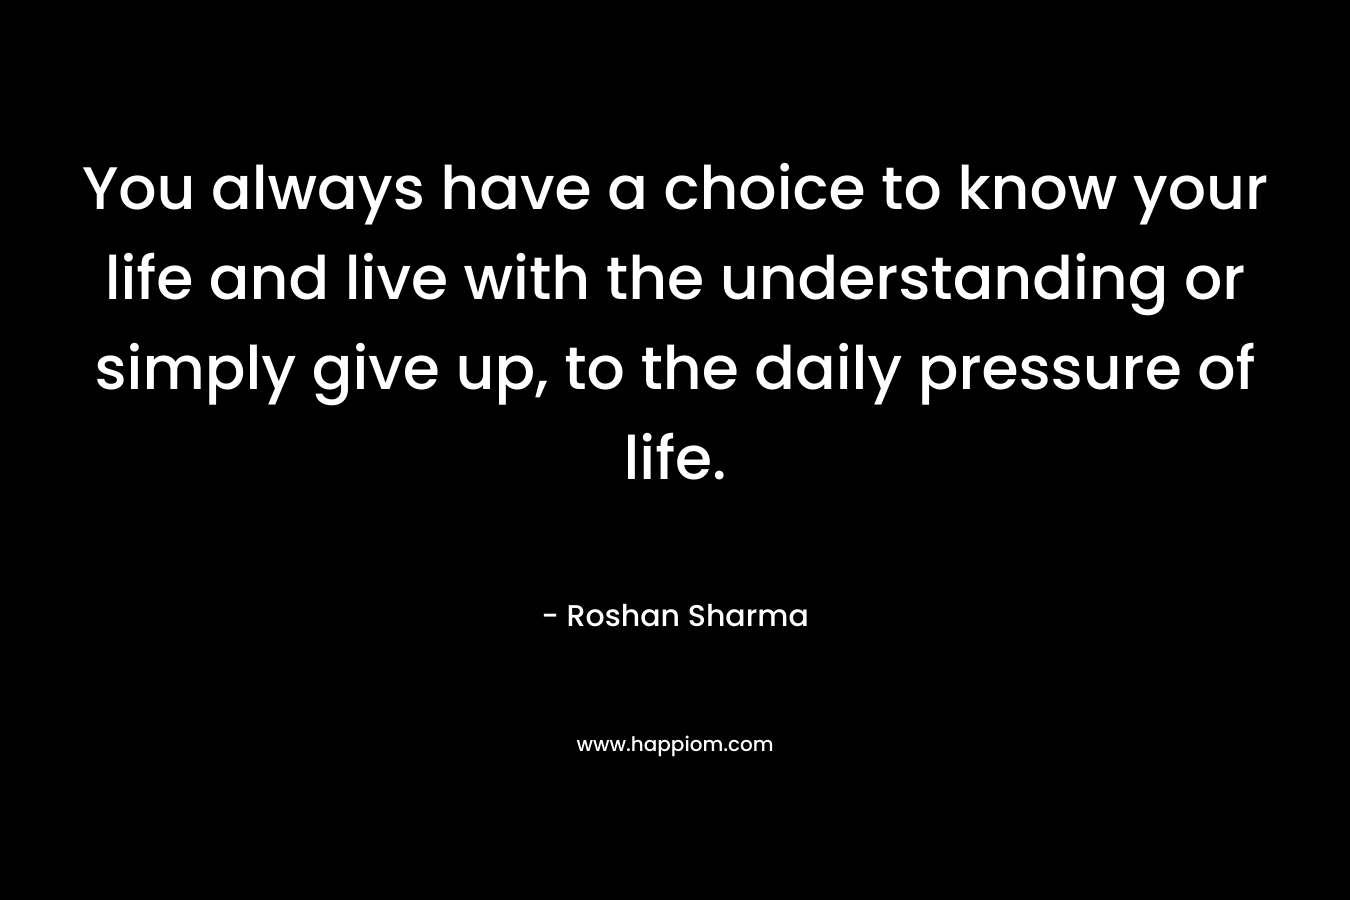 You always have a choice to know your life and live with the understanding or simply give up, to the daily pressure of life. – Roshan Sharma